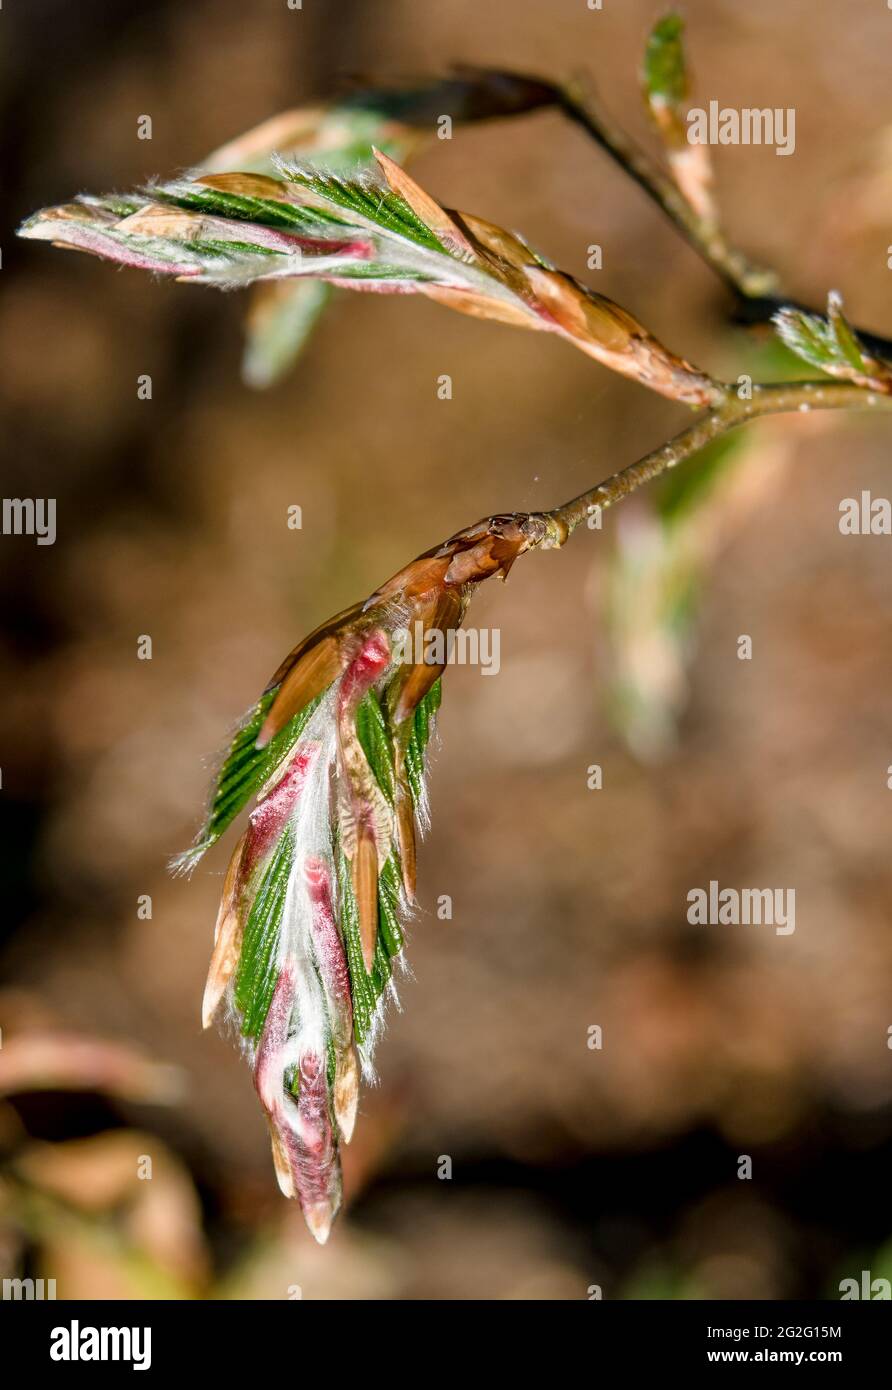 Young Beech Leaves emerging from leaf buds Stock Photo